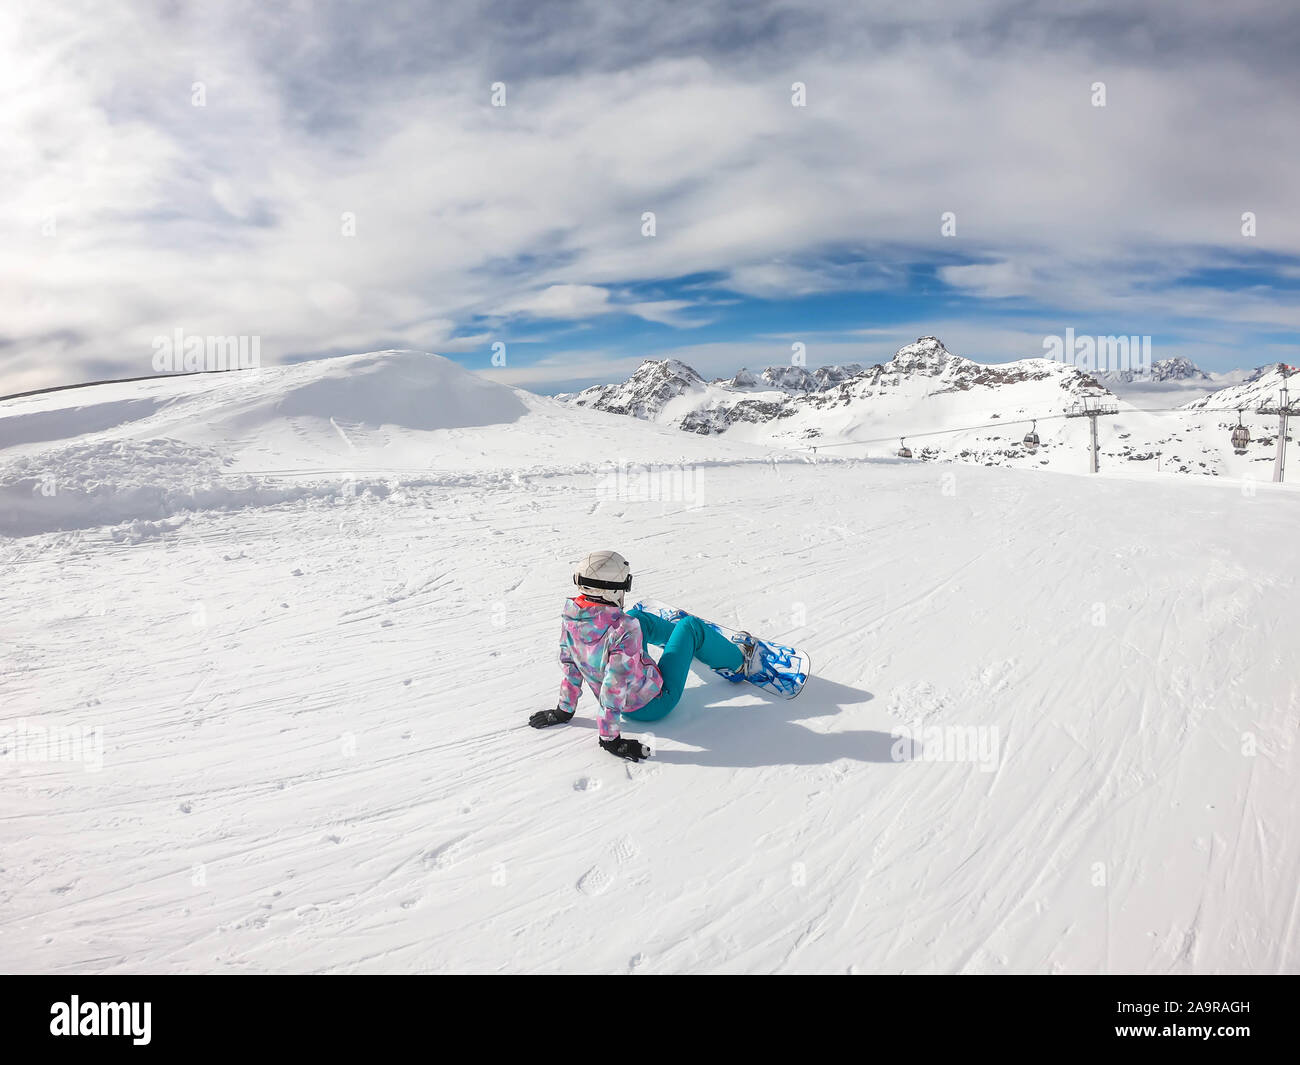 A snowboarder sitting on the slope in Mölltaler Gletscher, Austria. Perfectly groomed slopes. High mountains surrounding the girl wearing colourful sn Stock Photo